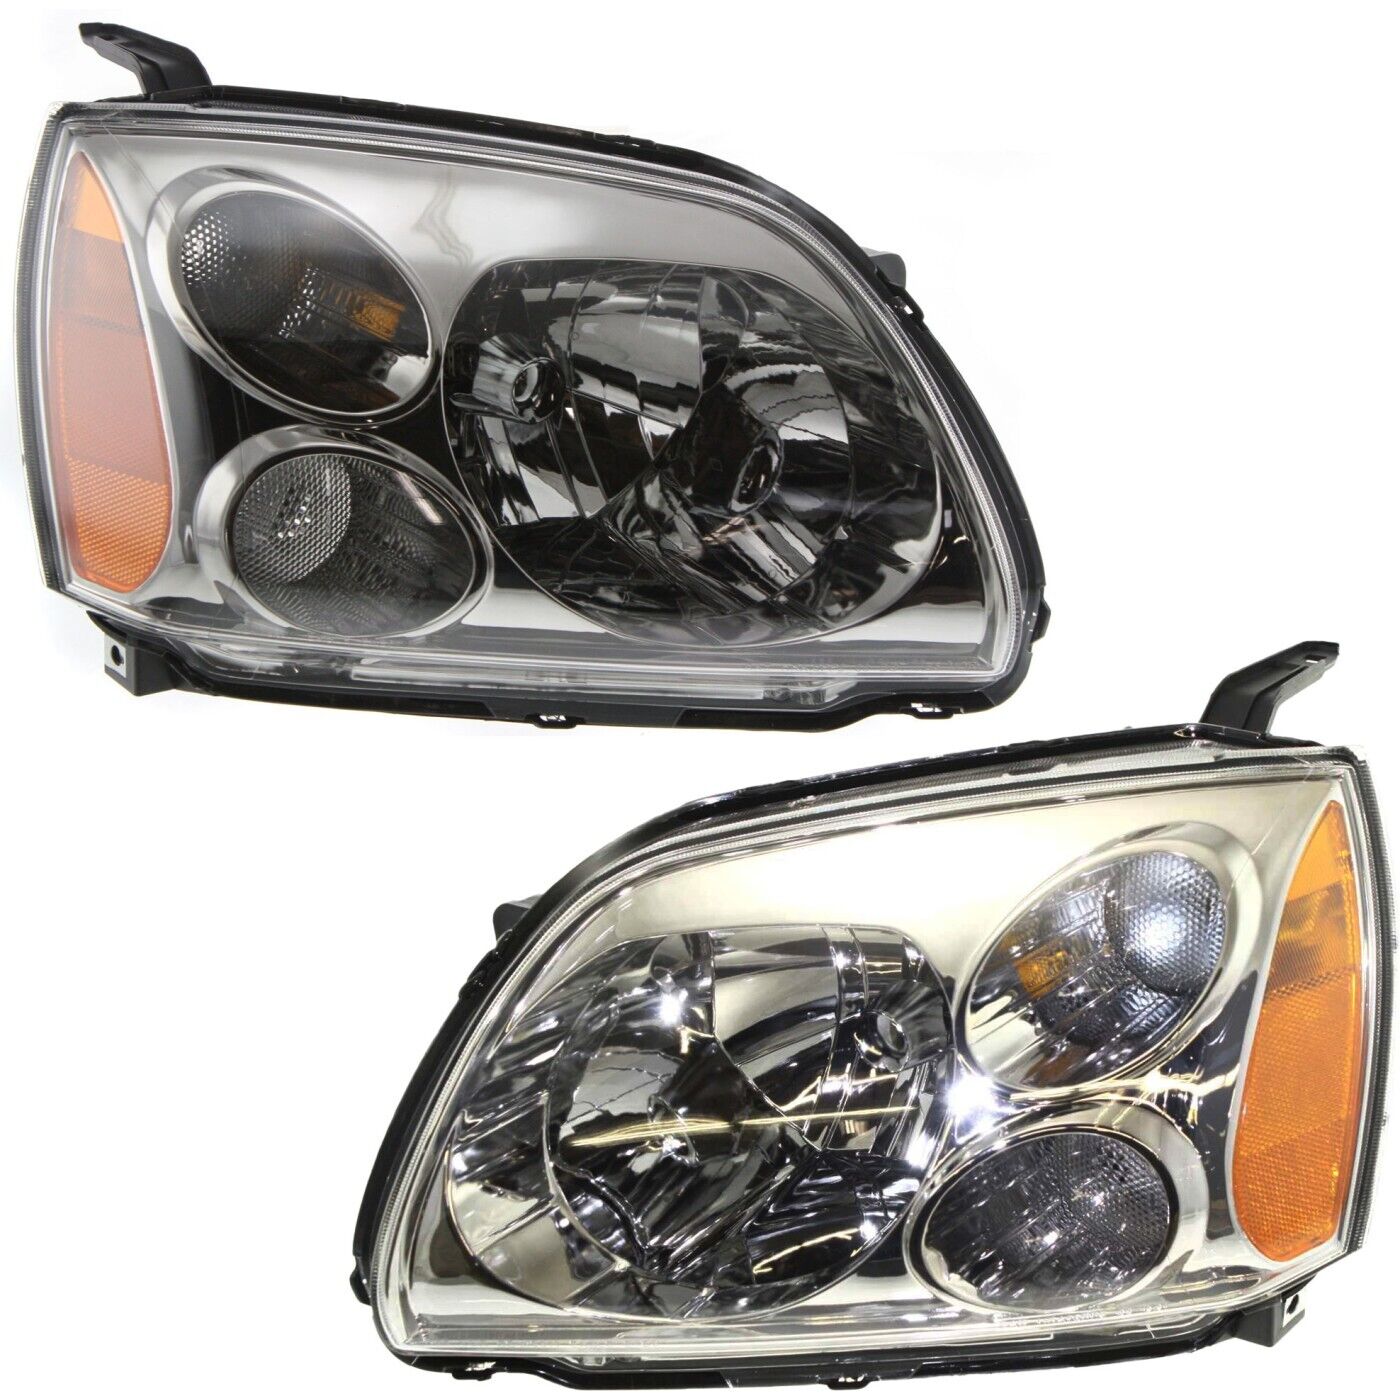 Headlight Set For 2005 2006 2007 Mitsubishi Galant Left and Right With Bulb 2Pc